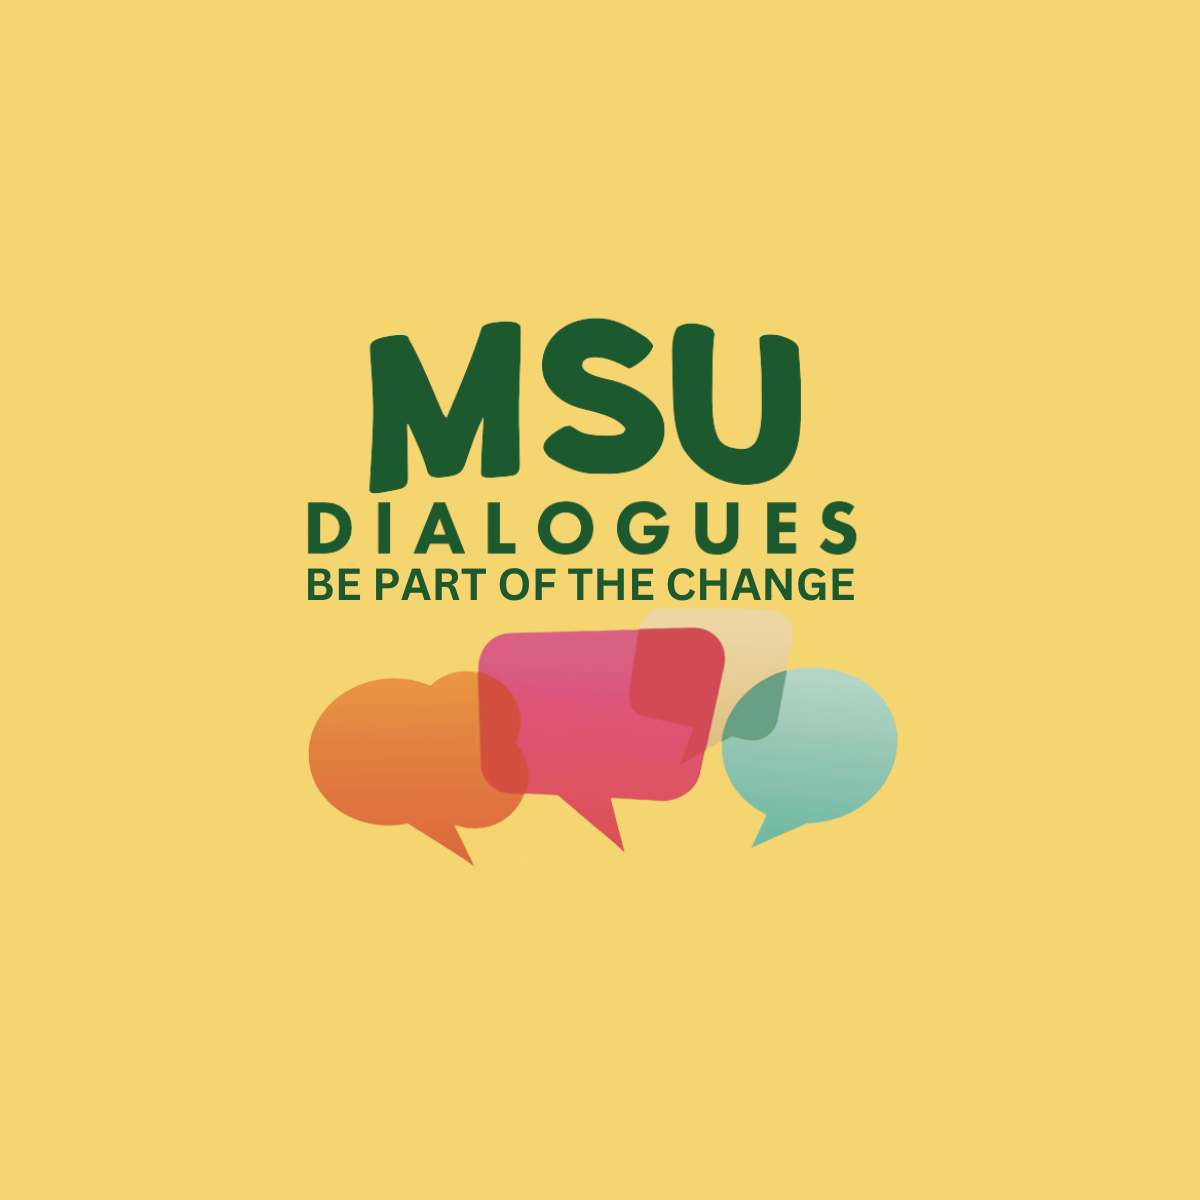 MSU Dialogues offers course for credit